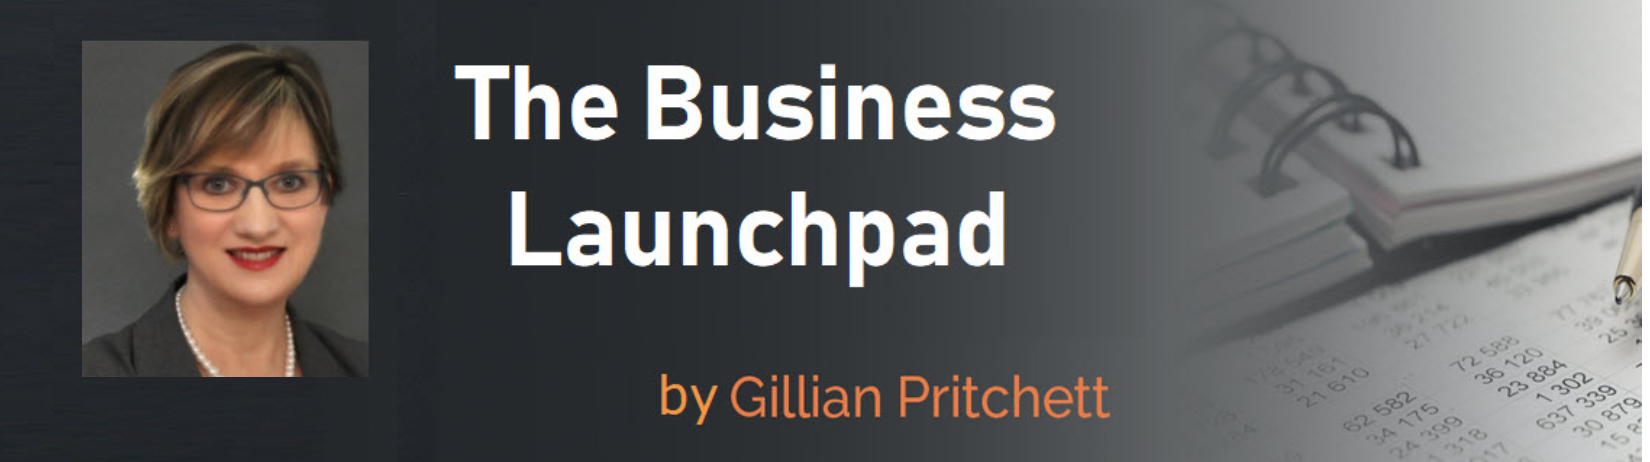 The Business Launchpad header image